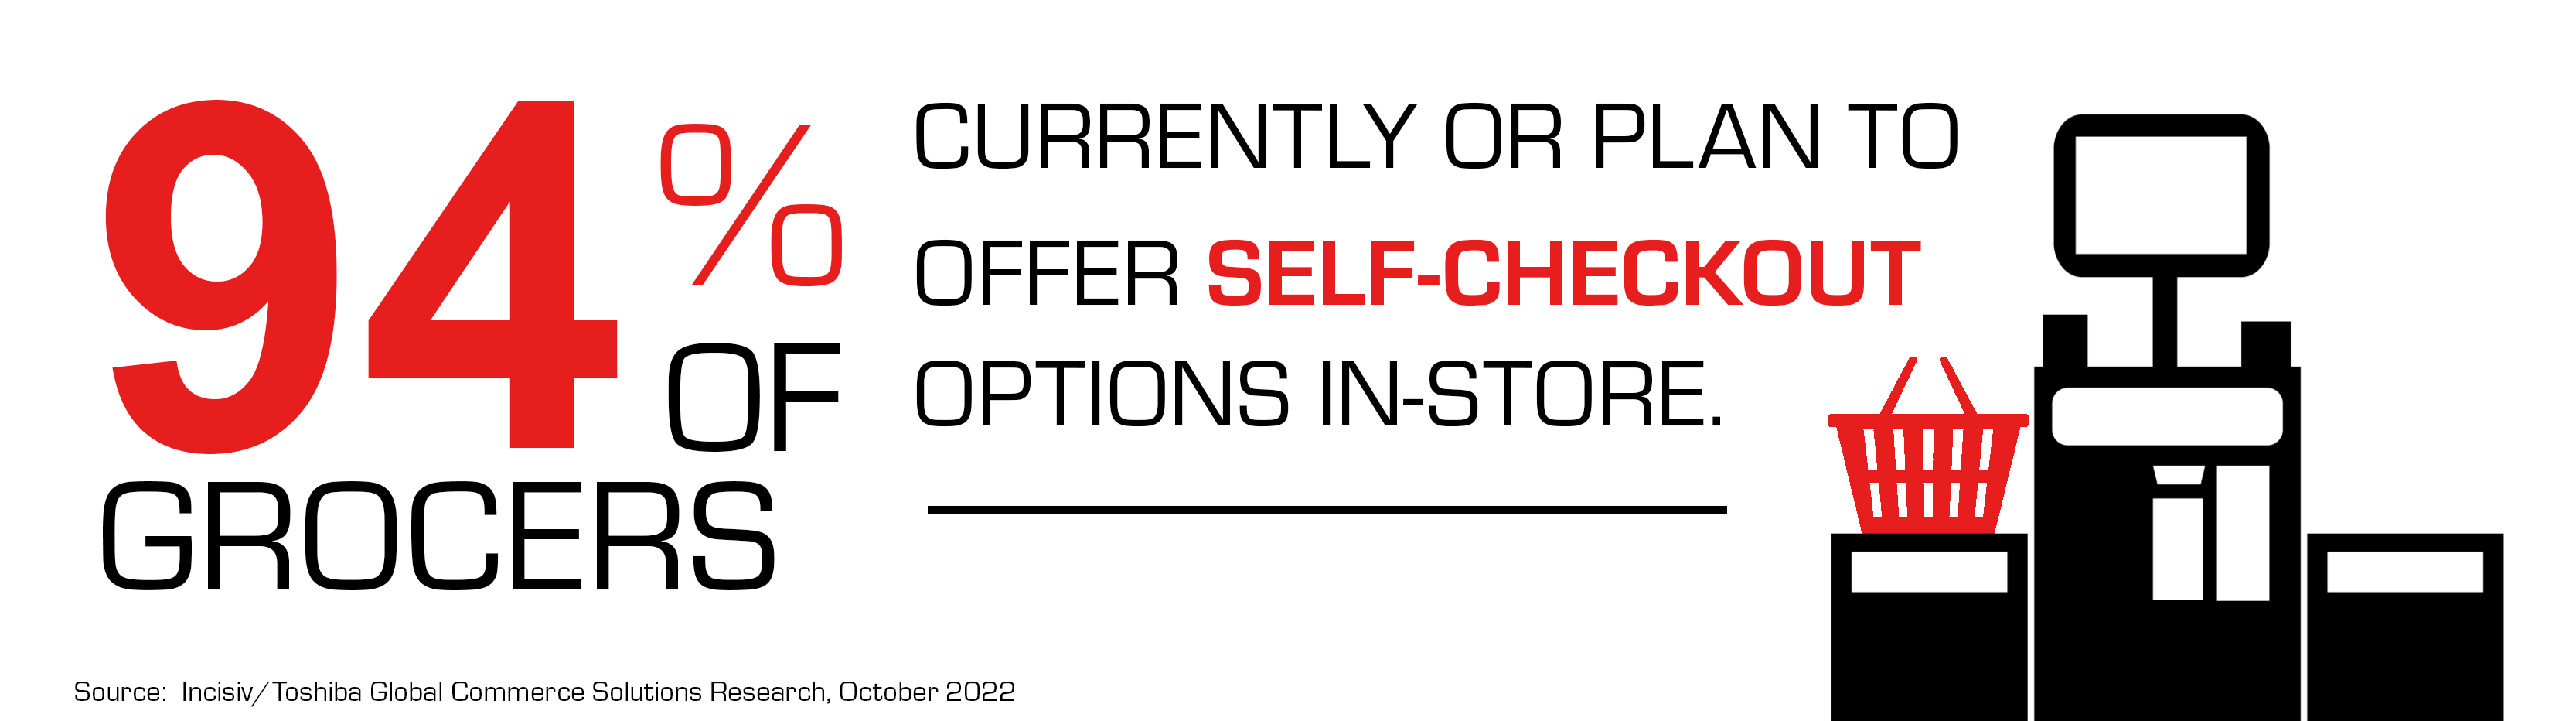 94% of grocers currently or plan to offer self-checkout options in-store